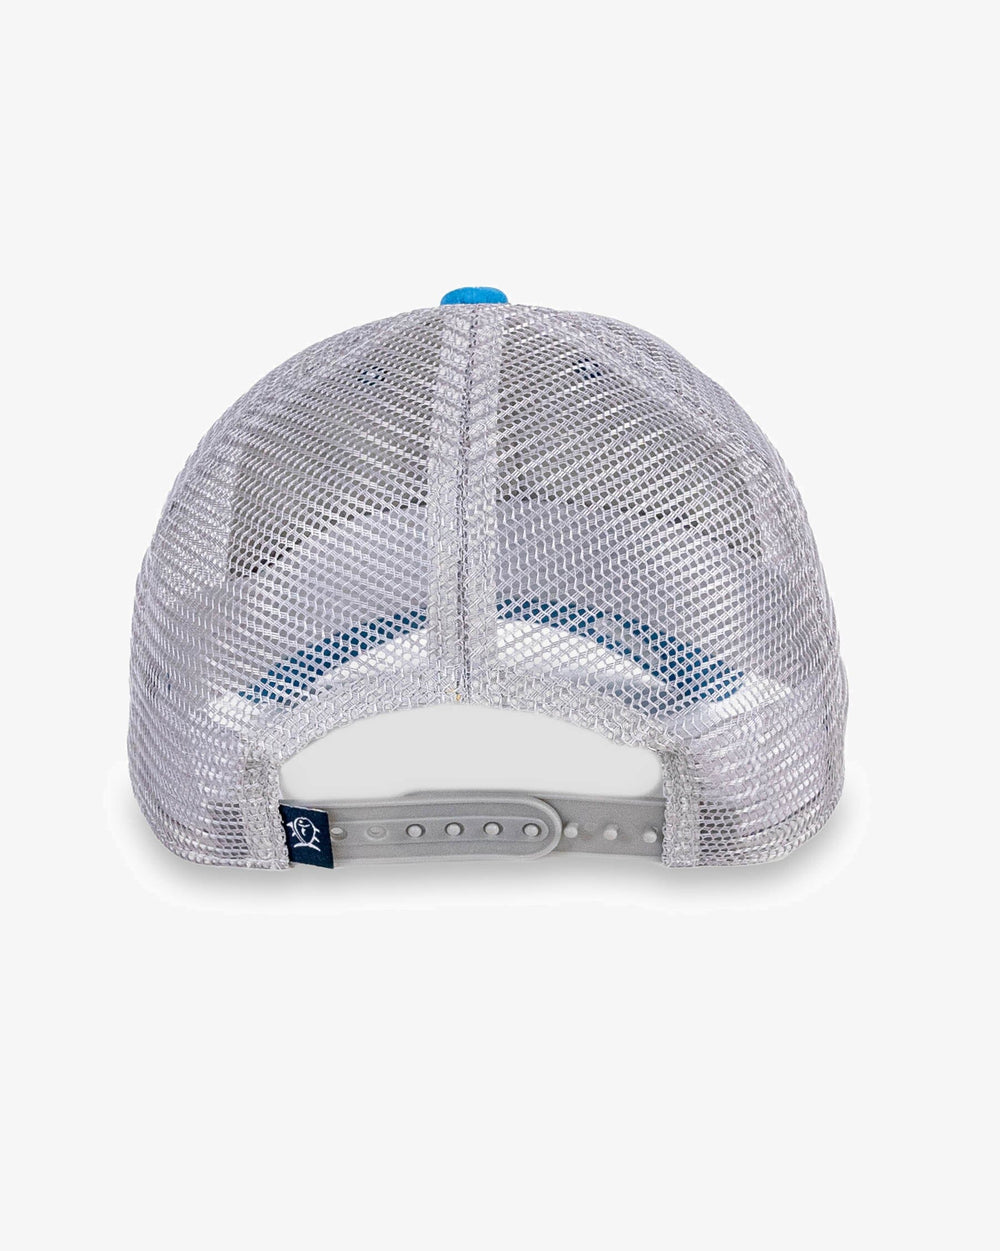 The back view of the Southern Tide Youth Flyday Trucker Hat by Southern Tide - Blue